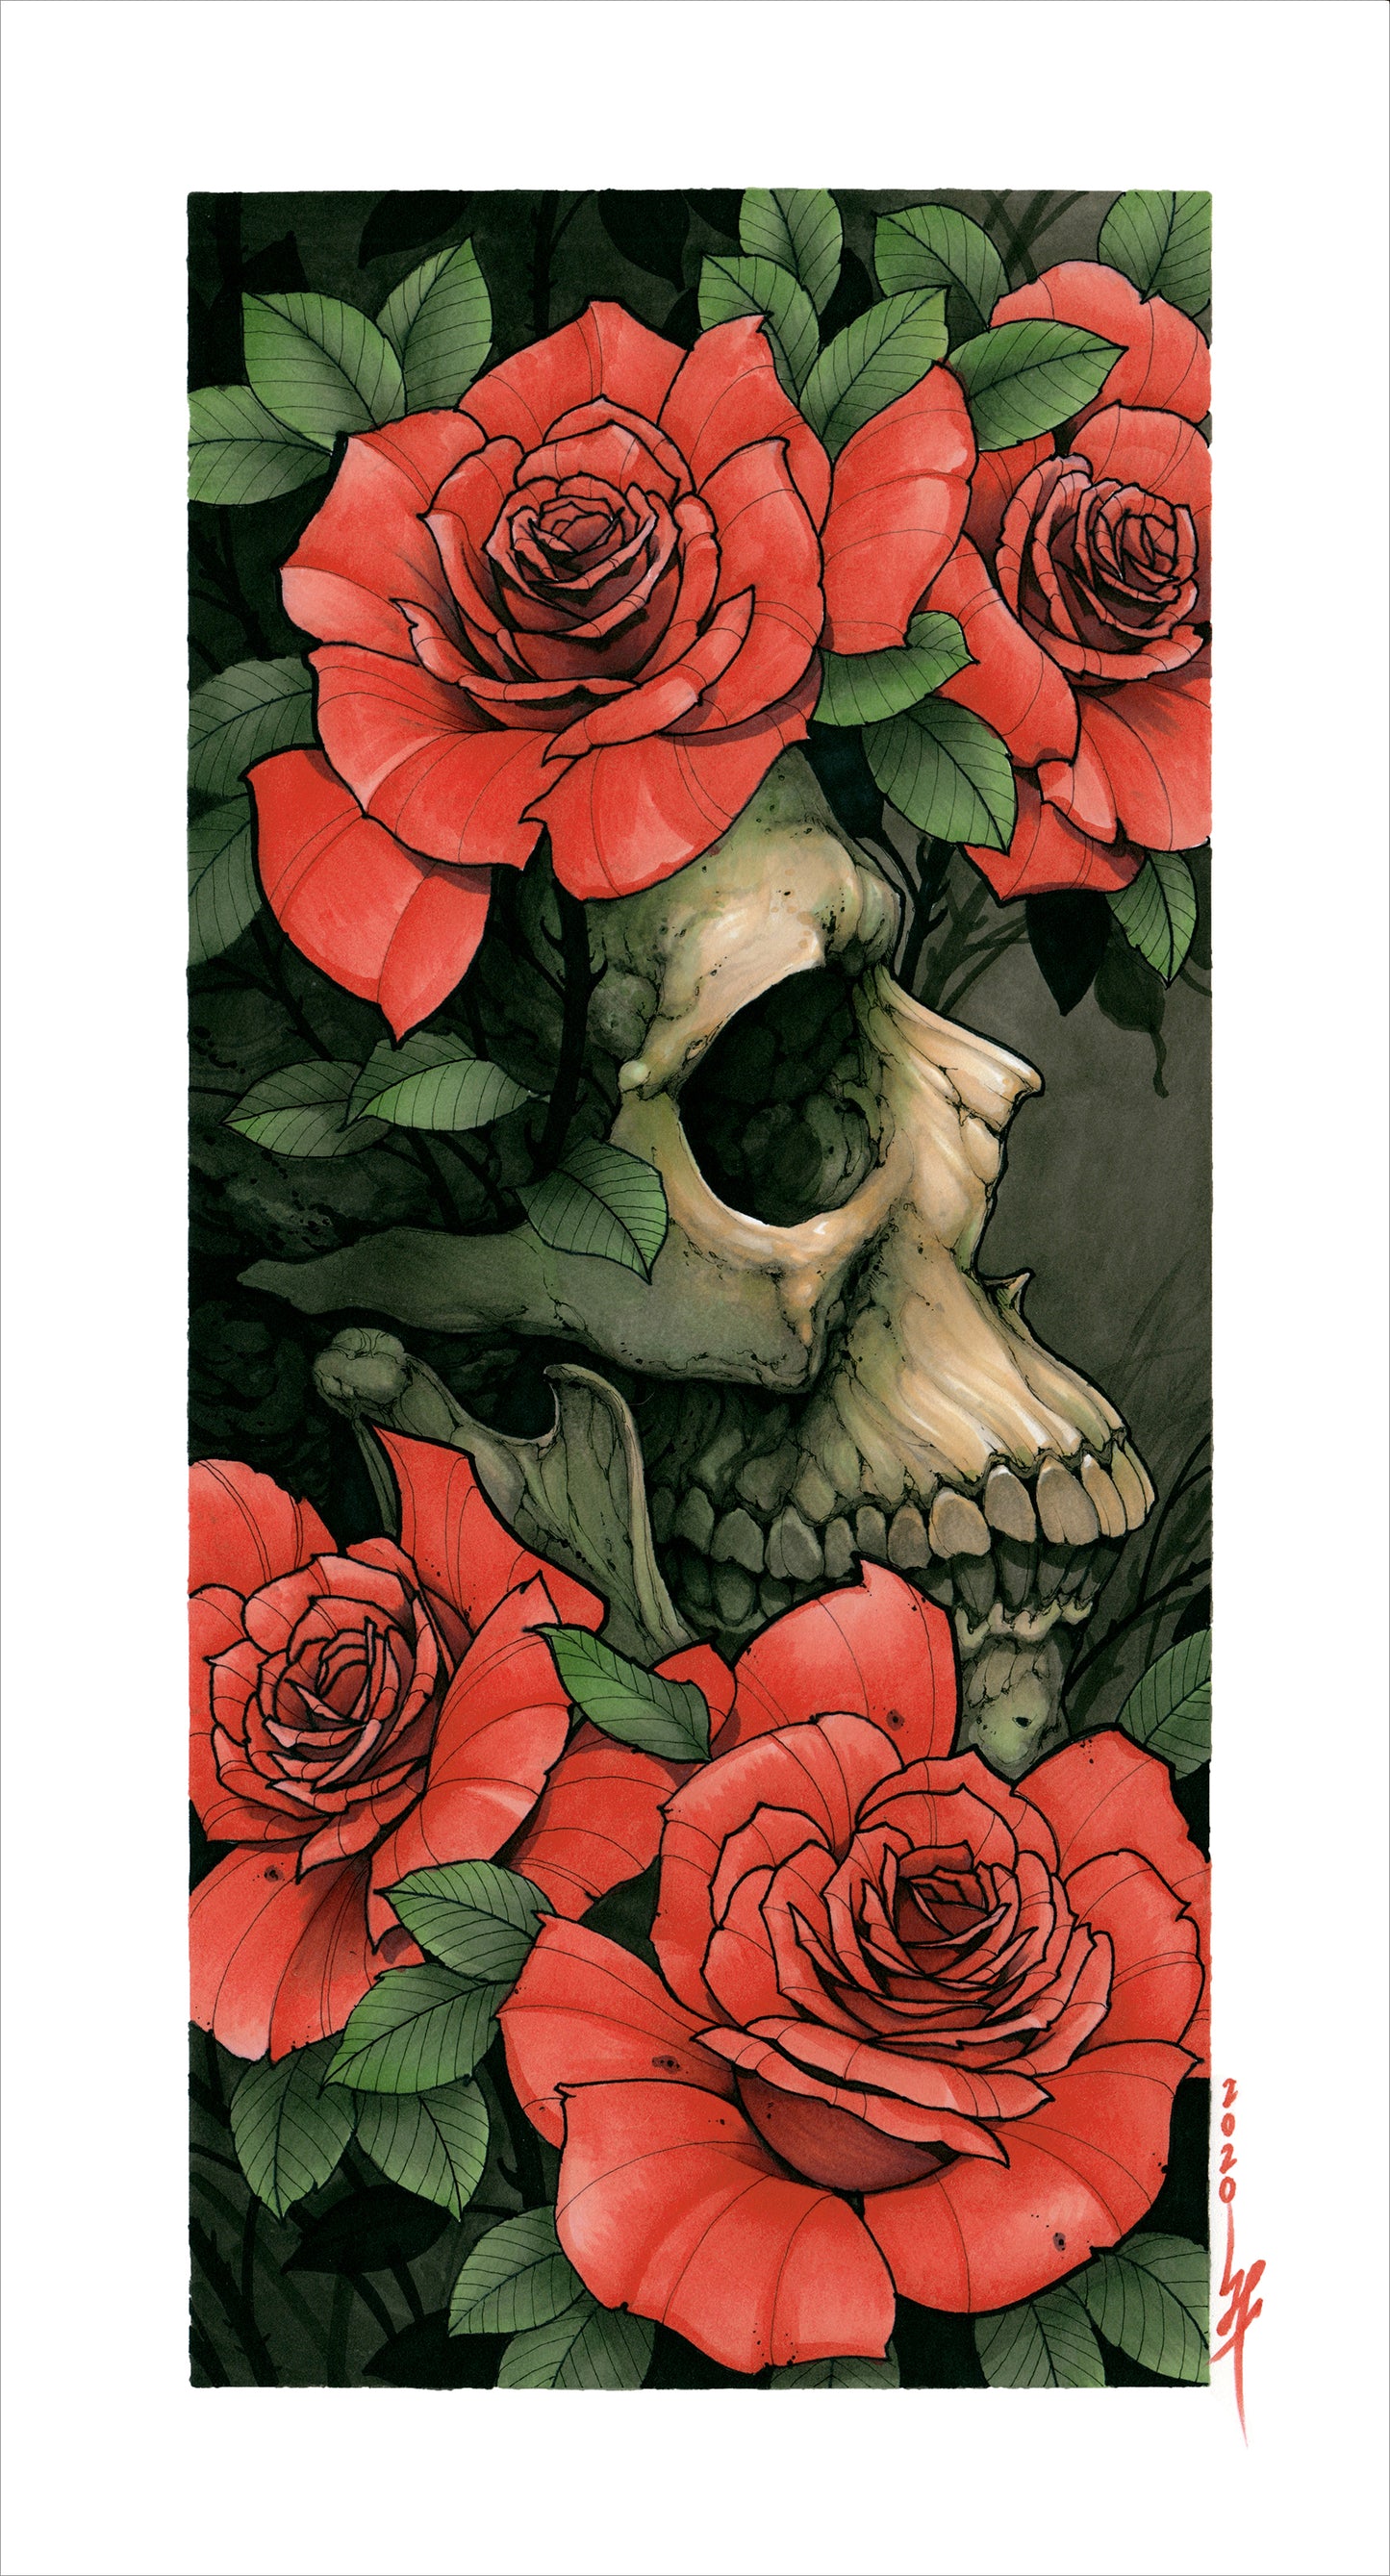 Skull and Roses